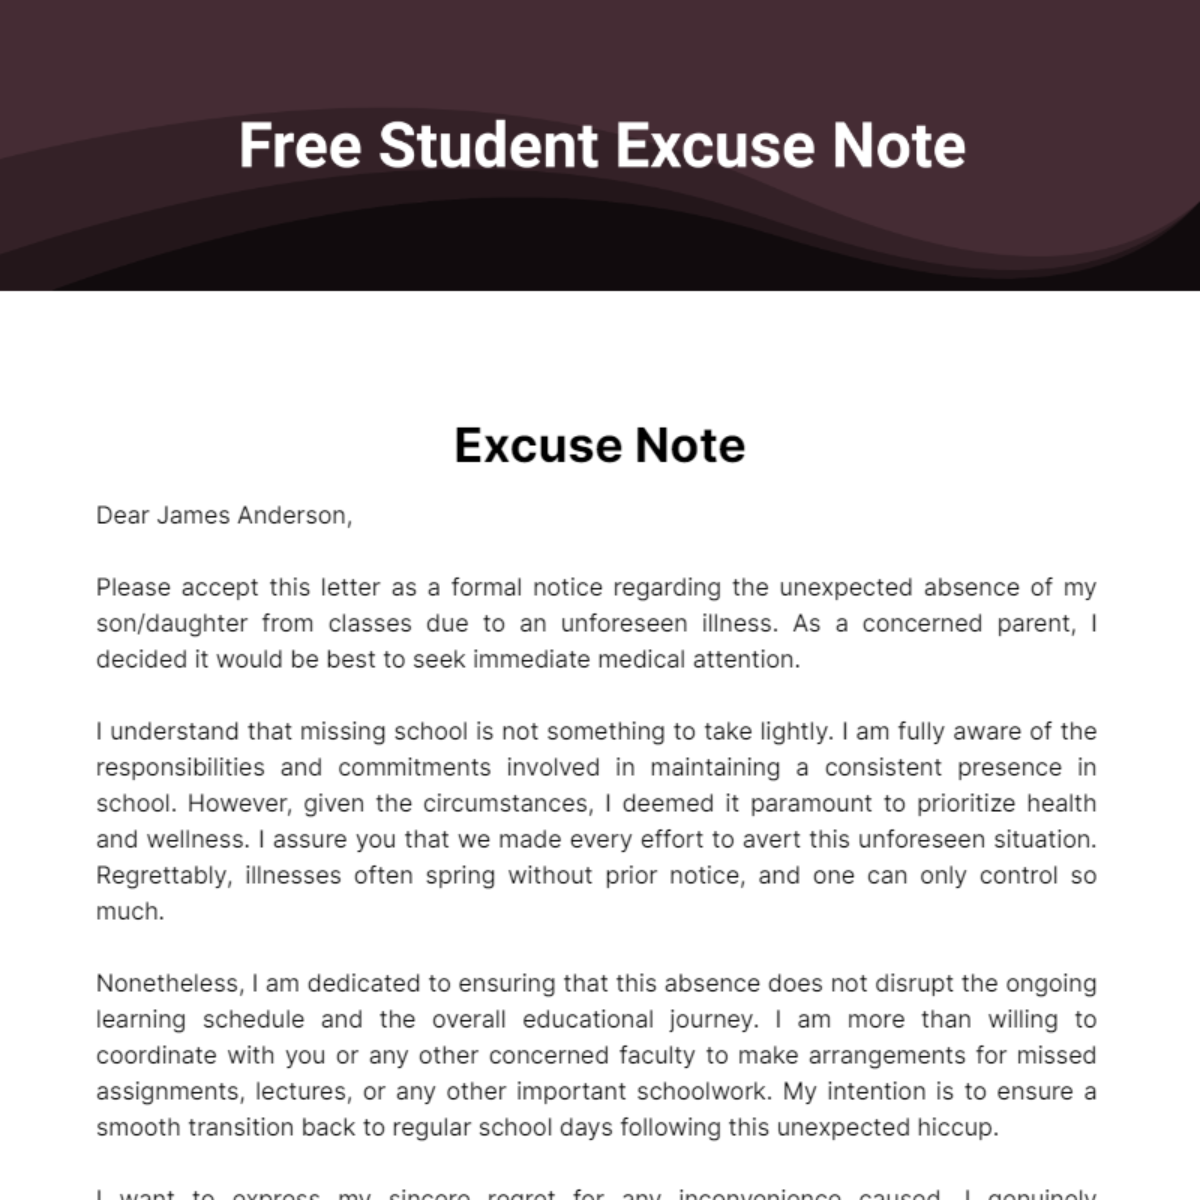 Free Student Excuse Note Template